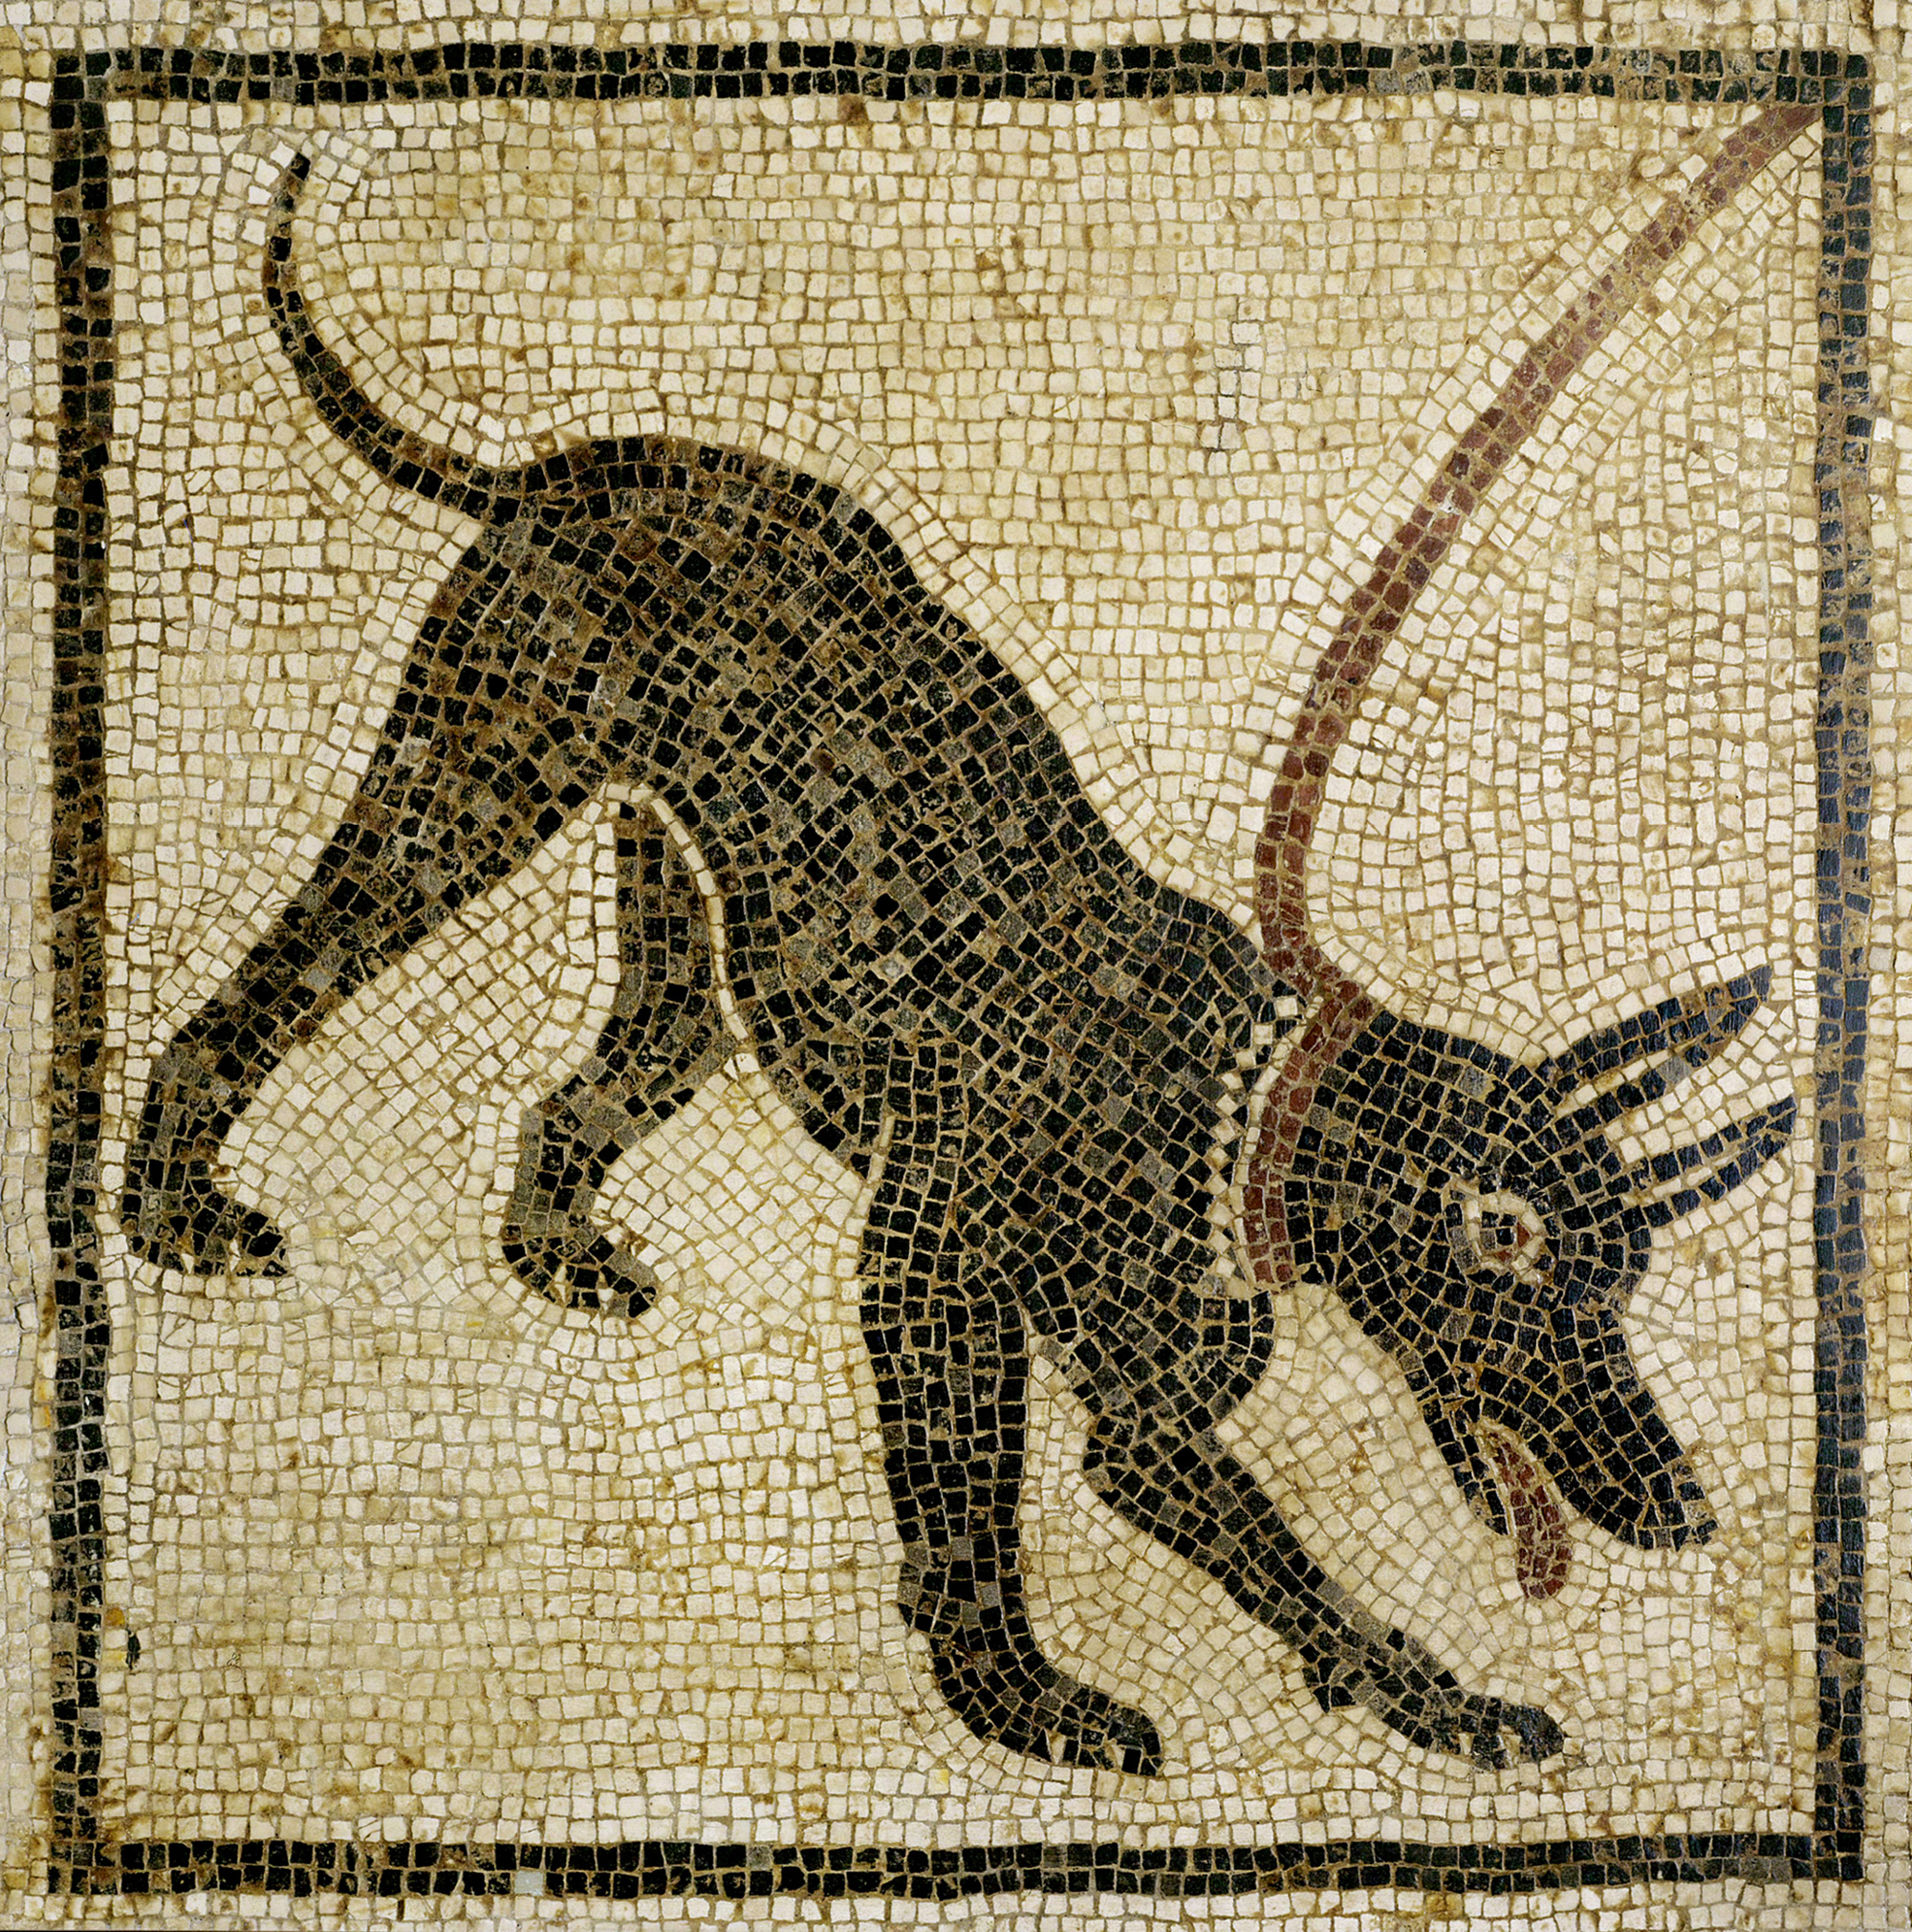 A photograph of the first century CE. mosaic from the “House of Orpheus” in Pompeii warning would-be thieves of the presence of a guard dog.